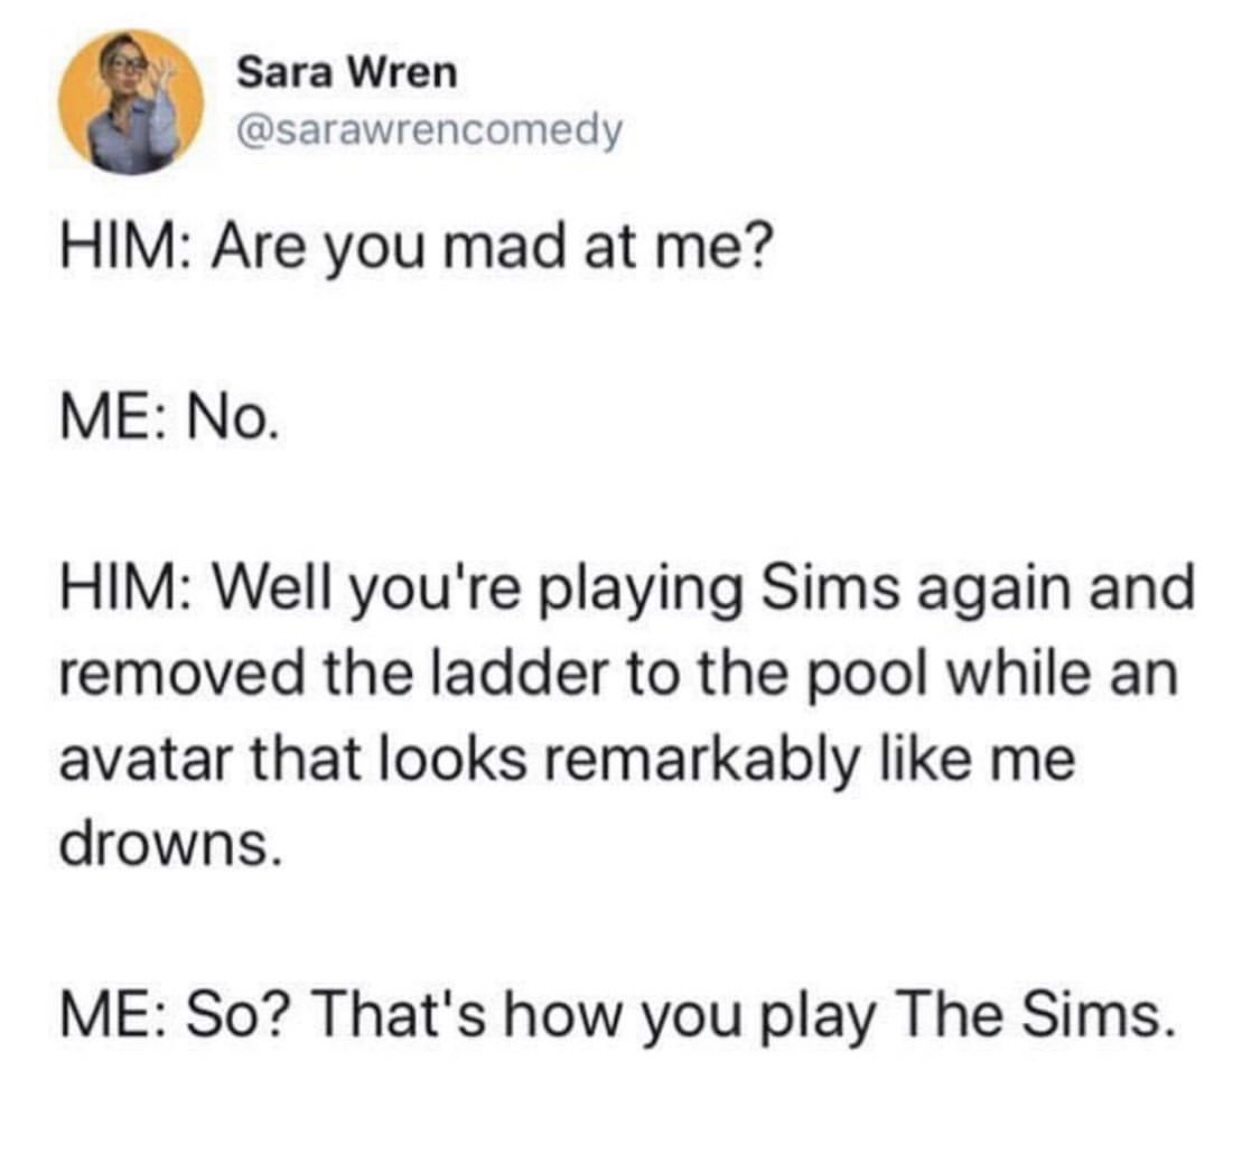 document - Sara Wren Him Are you mad at me? Me No. Him Well you're playing Sims again and removed the ladder to the pool while an avatar that looks remarkably me drowns. Me So? That's how you play The Sims.